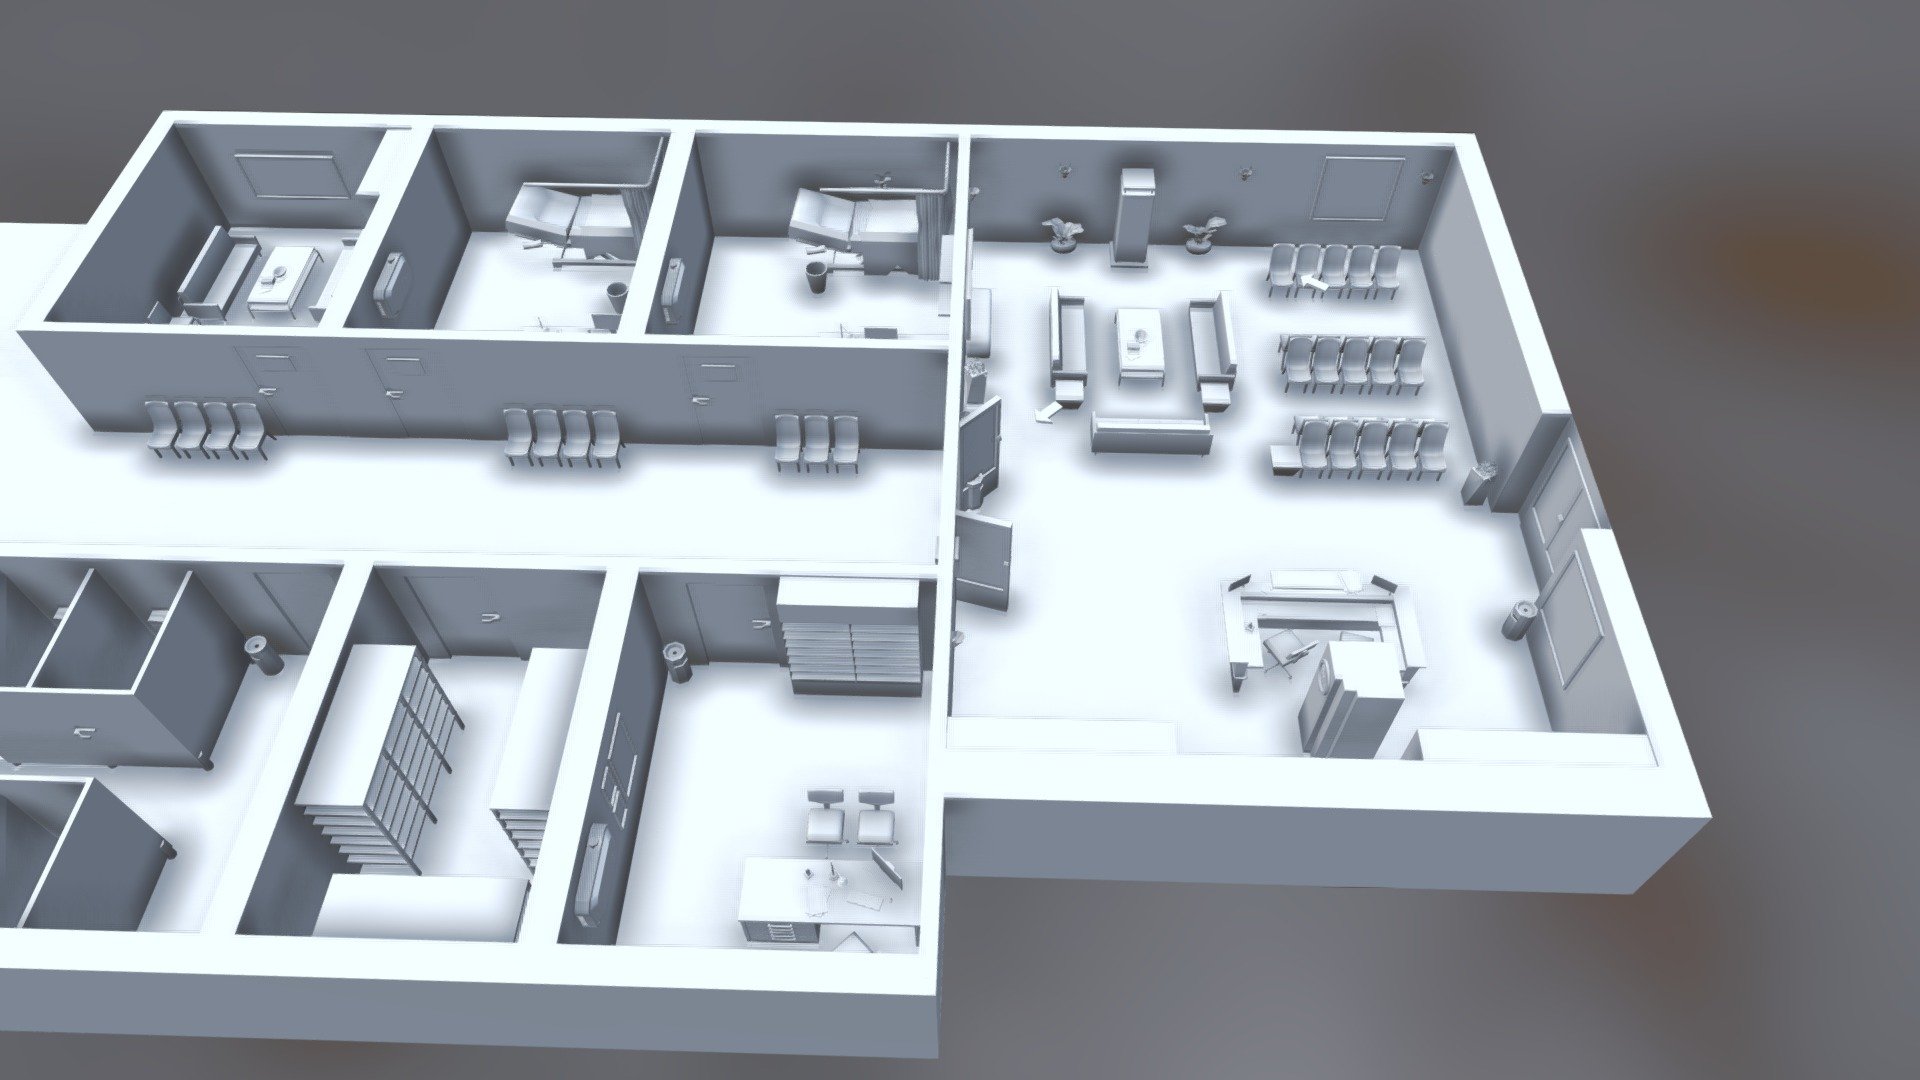 3D model representing hospital's reception, nurses and examination rooms as well as the staff, the store rooms and the toilets.

If you wanna buy this 3D model, contact me on discord: https://discord.gg/mYxgnmxr - Hospital 3D model - 3D model by DuskoAvramovski 3d model